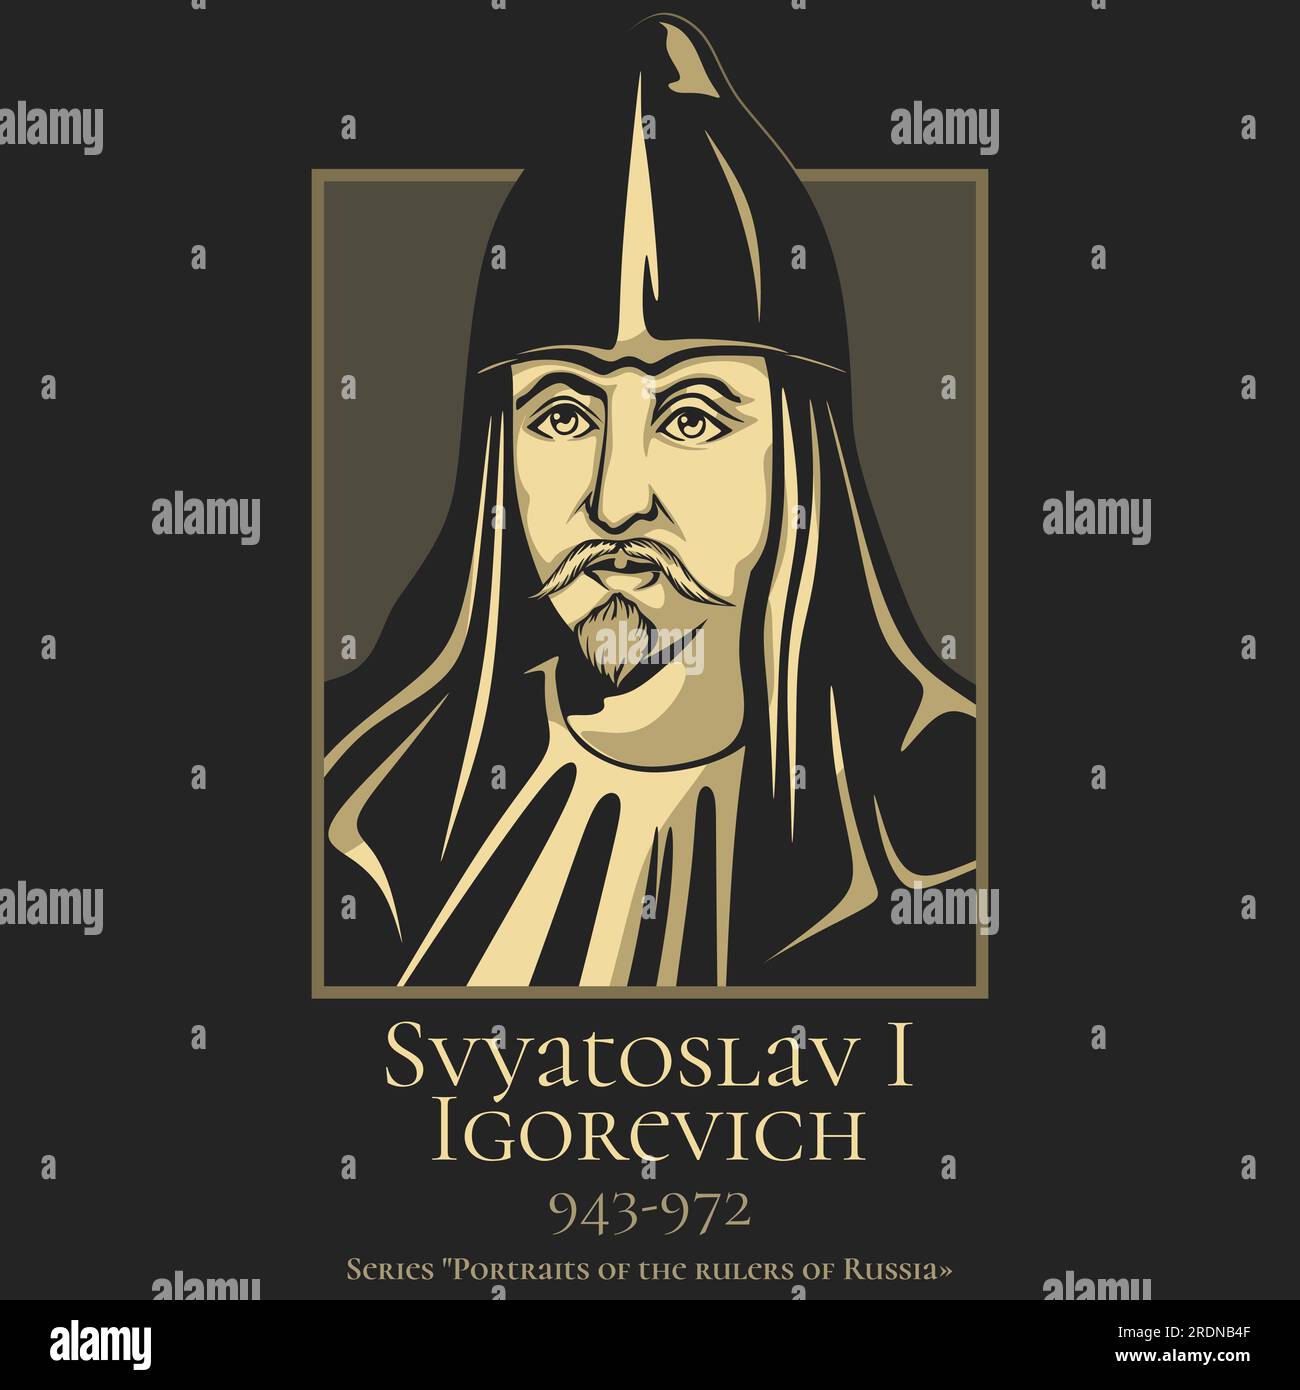 Portrait of the rulers of Russia. Svyatoslav I Igorevich (943-972) was Grand Prince of Kiev known for his persistent campaigns in the east and south, Stock Vector